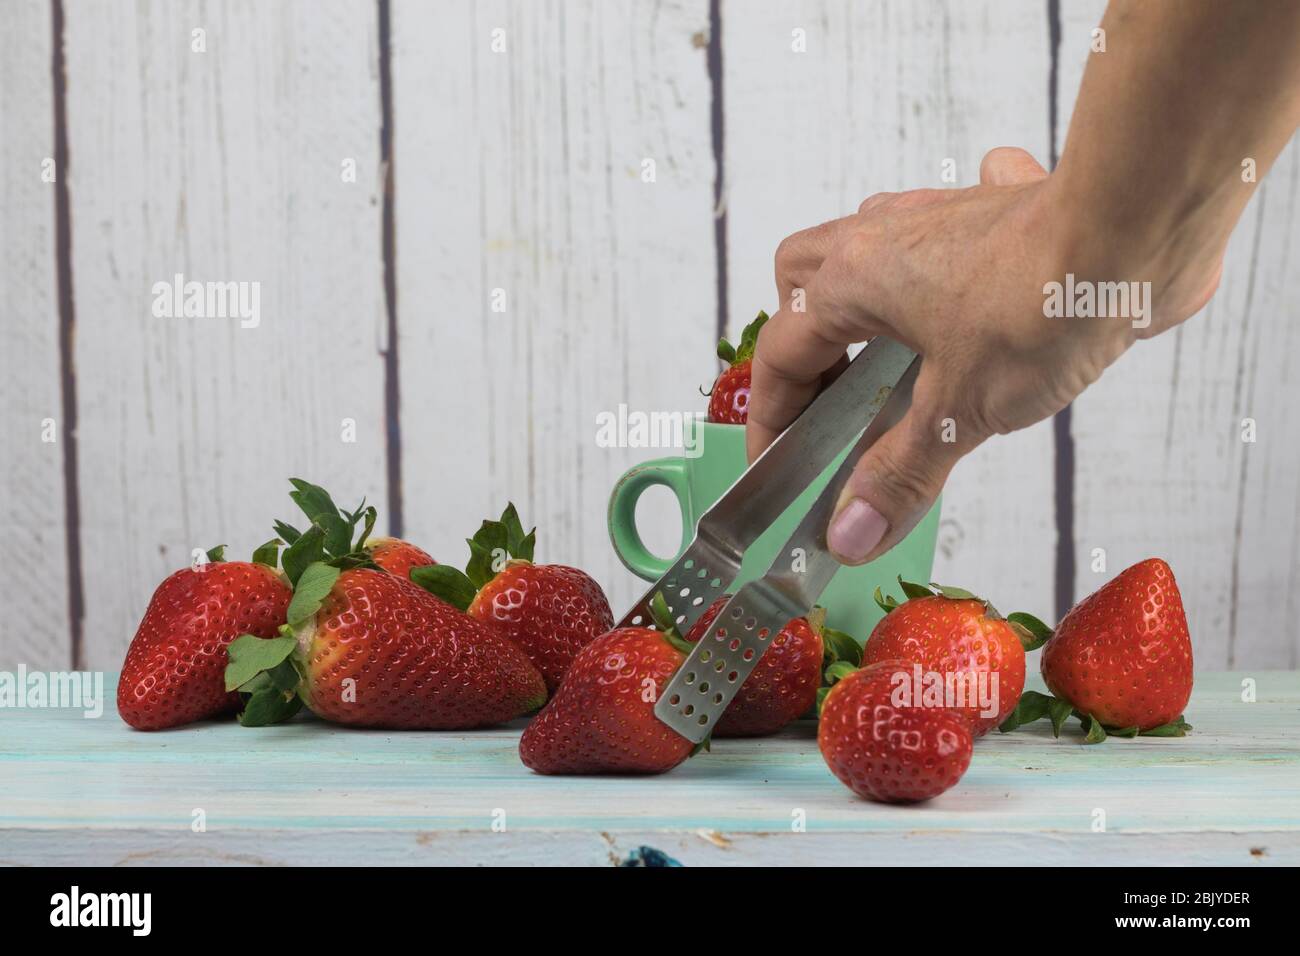 Human hand picking strawberries with pliers, on a white wooden background Stock Photo